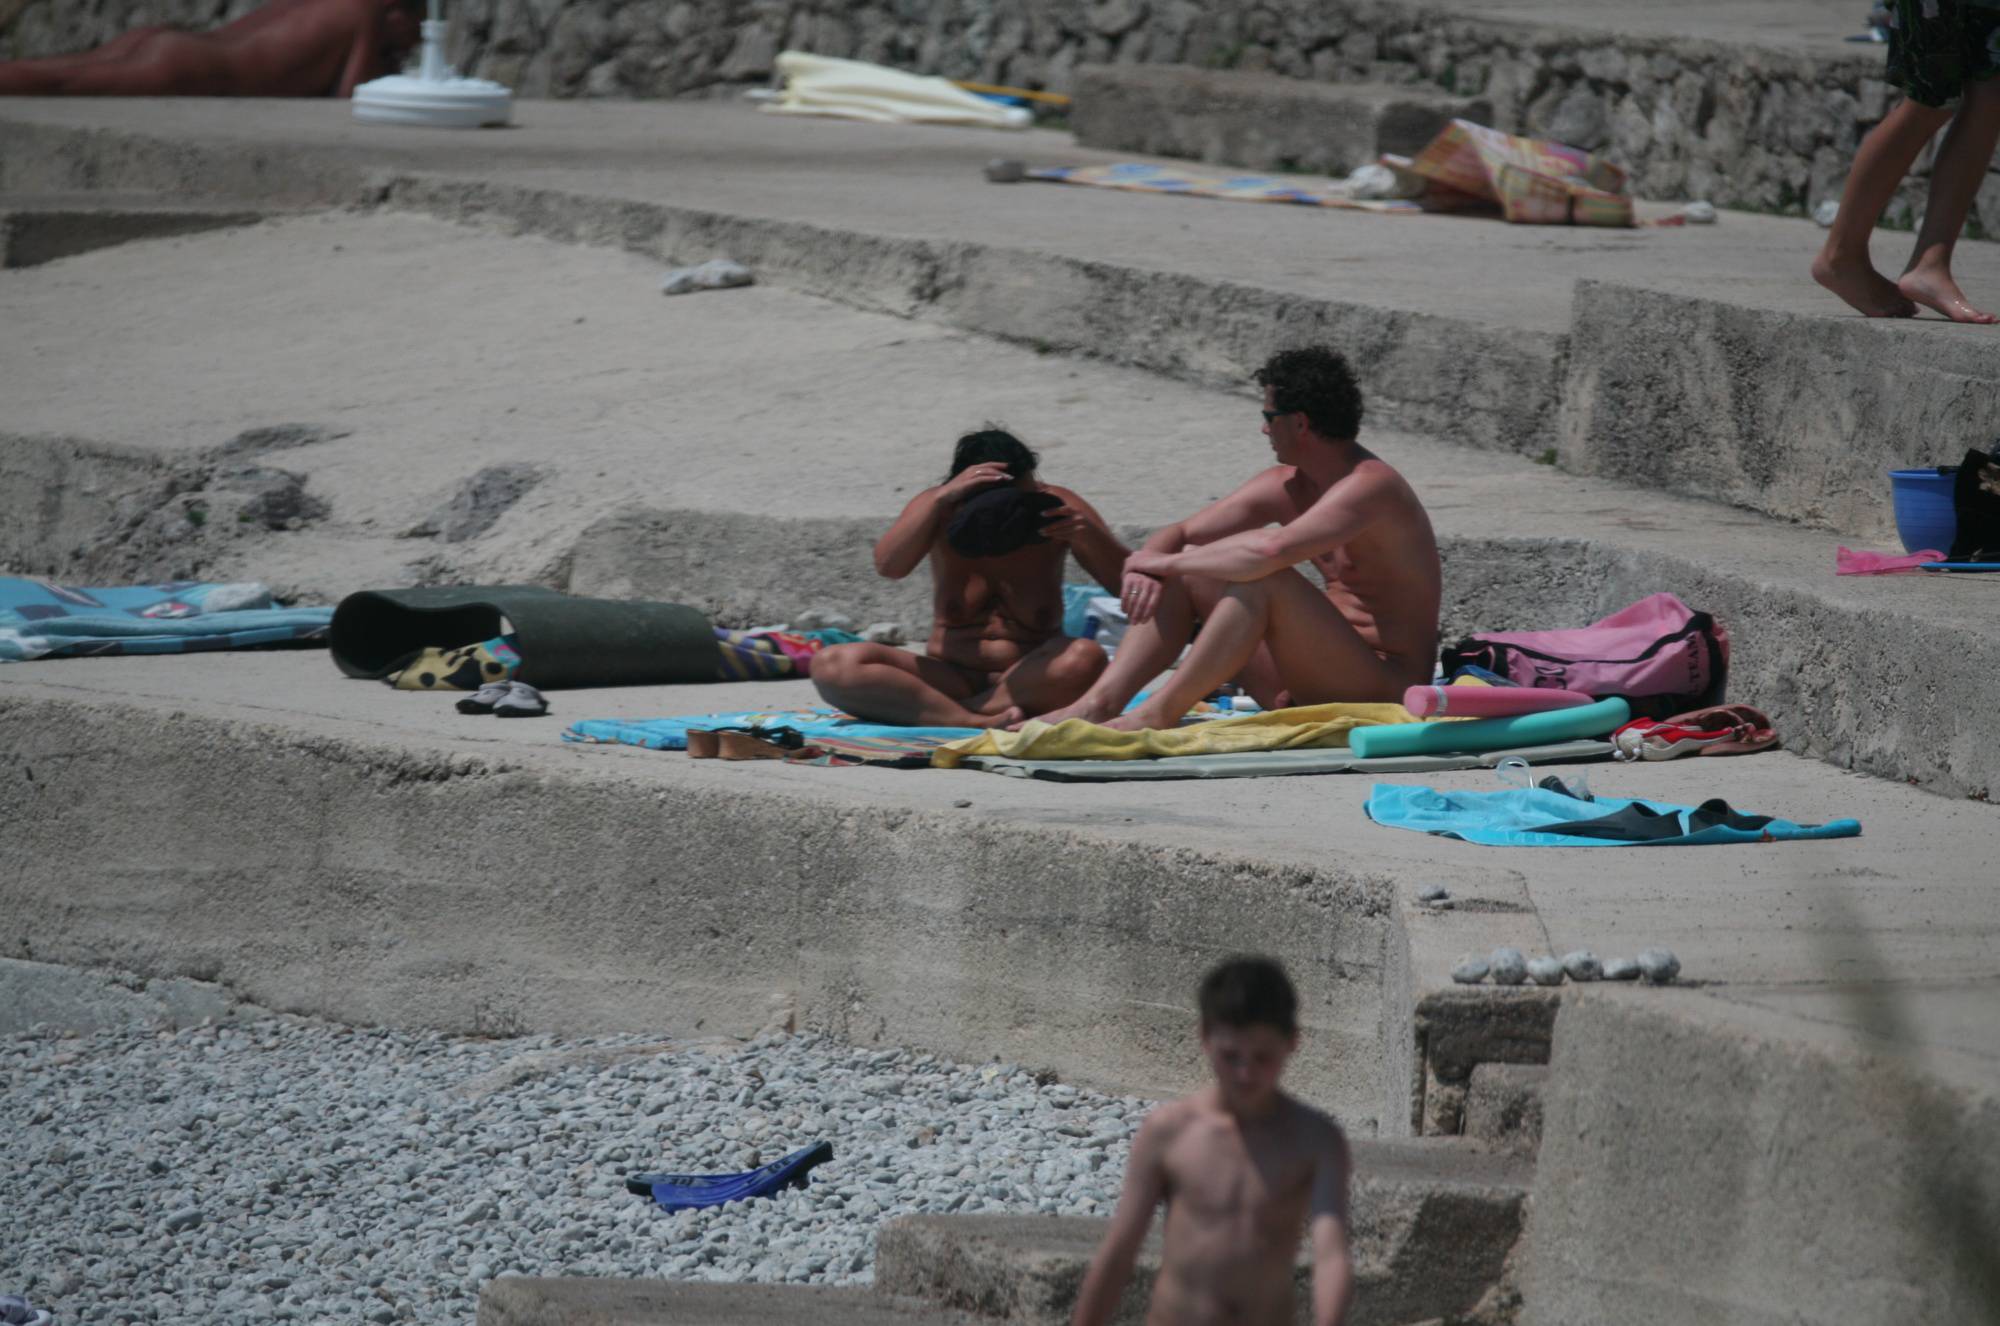 Pure Nudism Images-Cove Pyramid Sun Bathers - 2